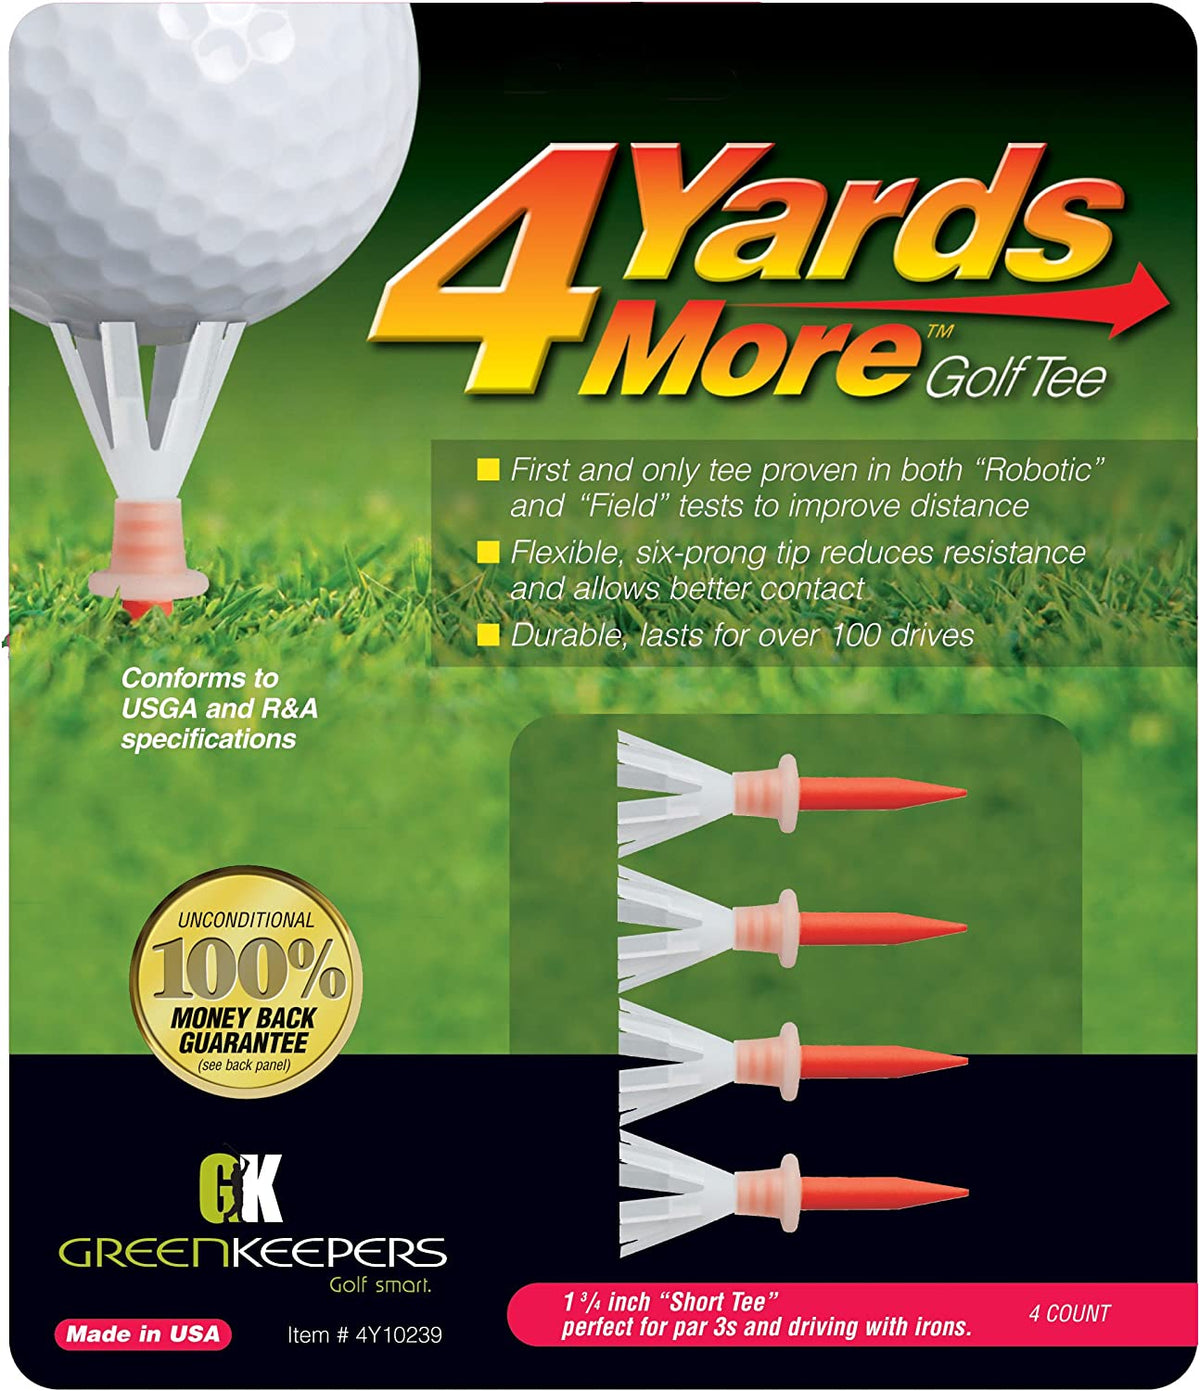 GREEN KEEPERS 4 YARDS MORE TEES 1 3/4"